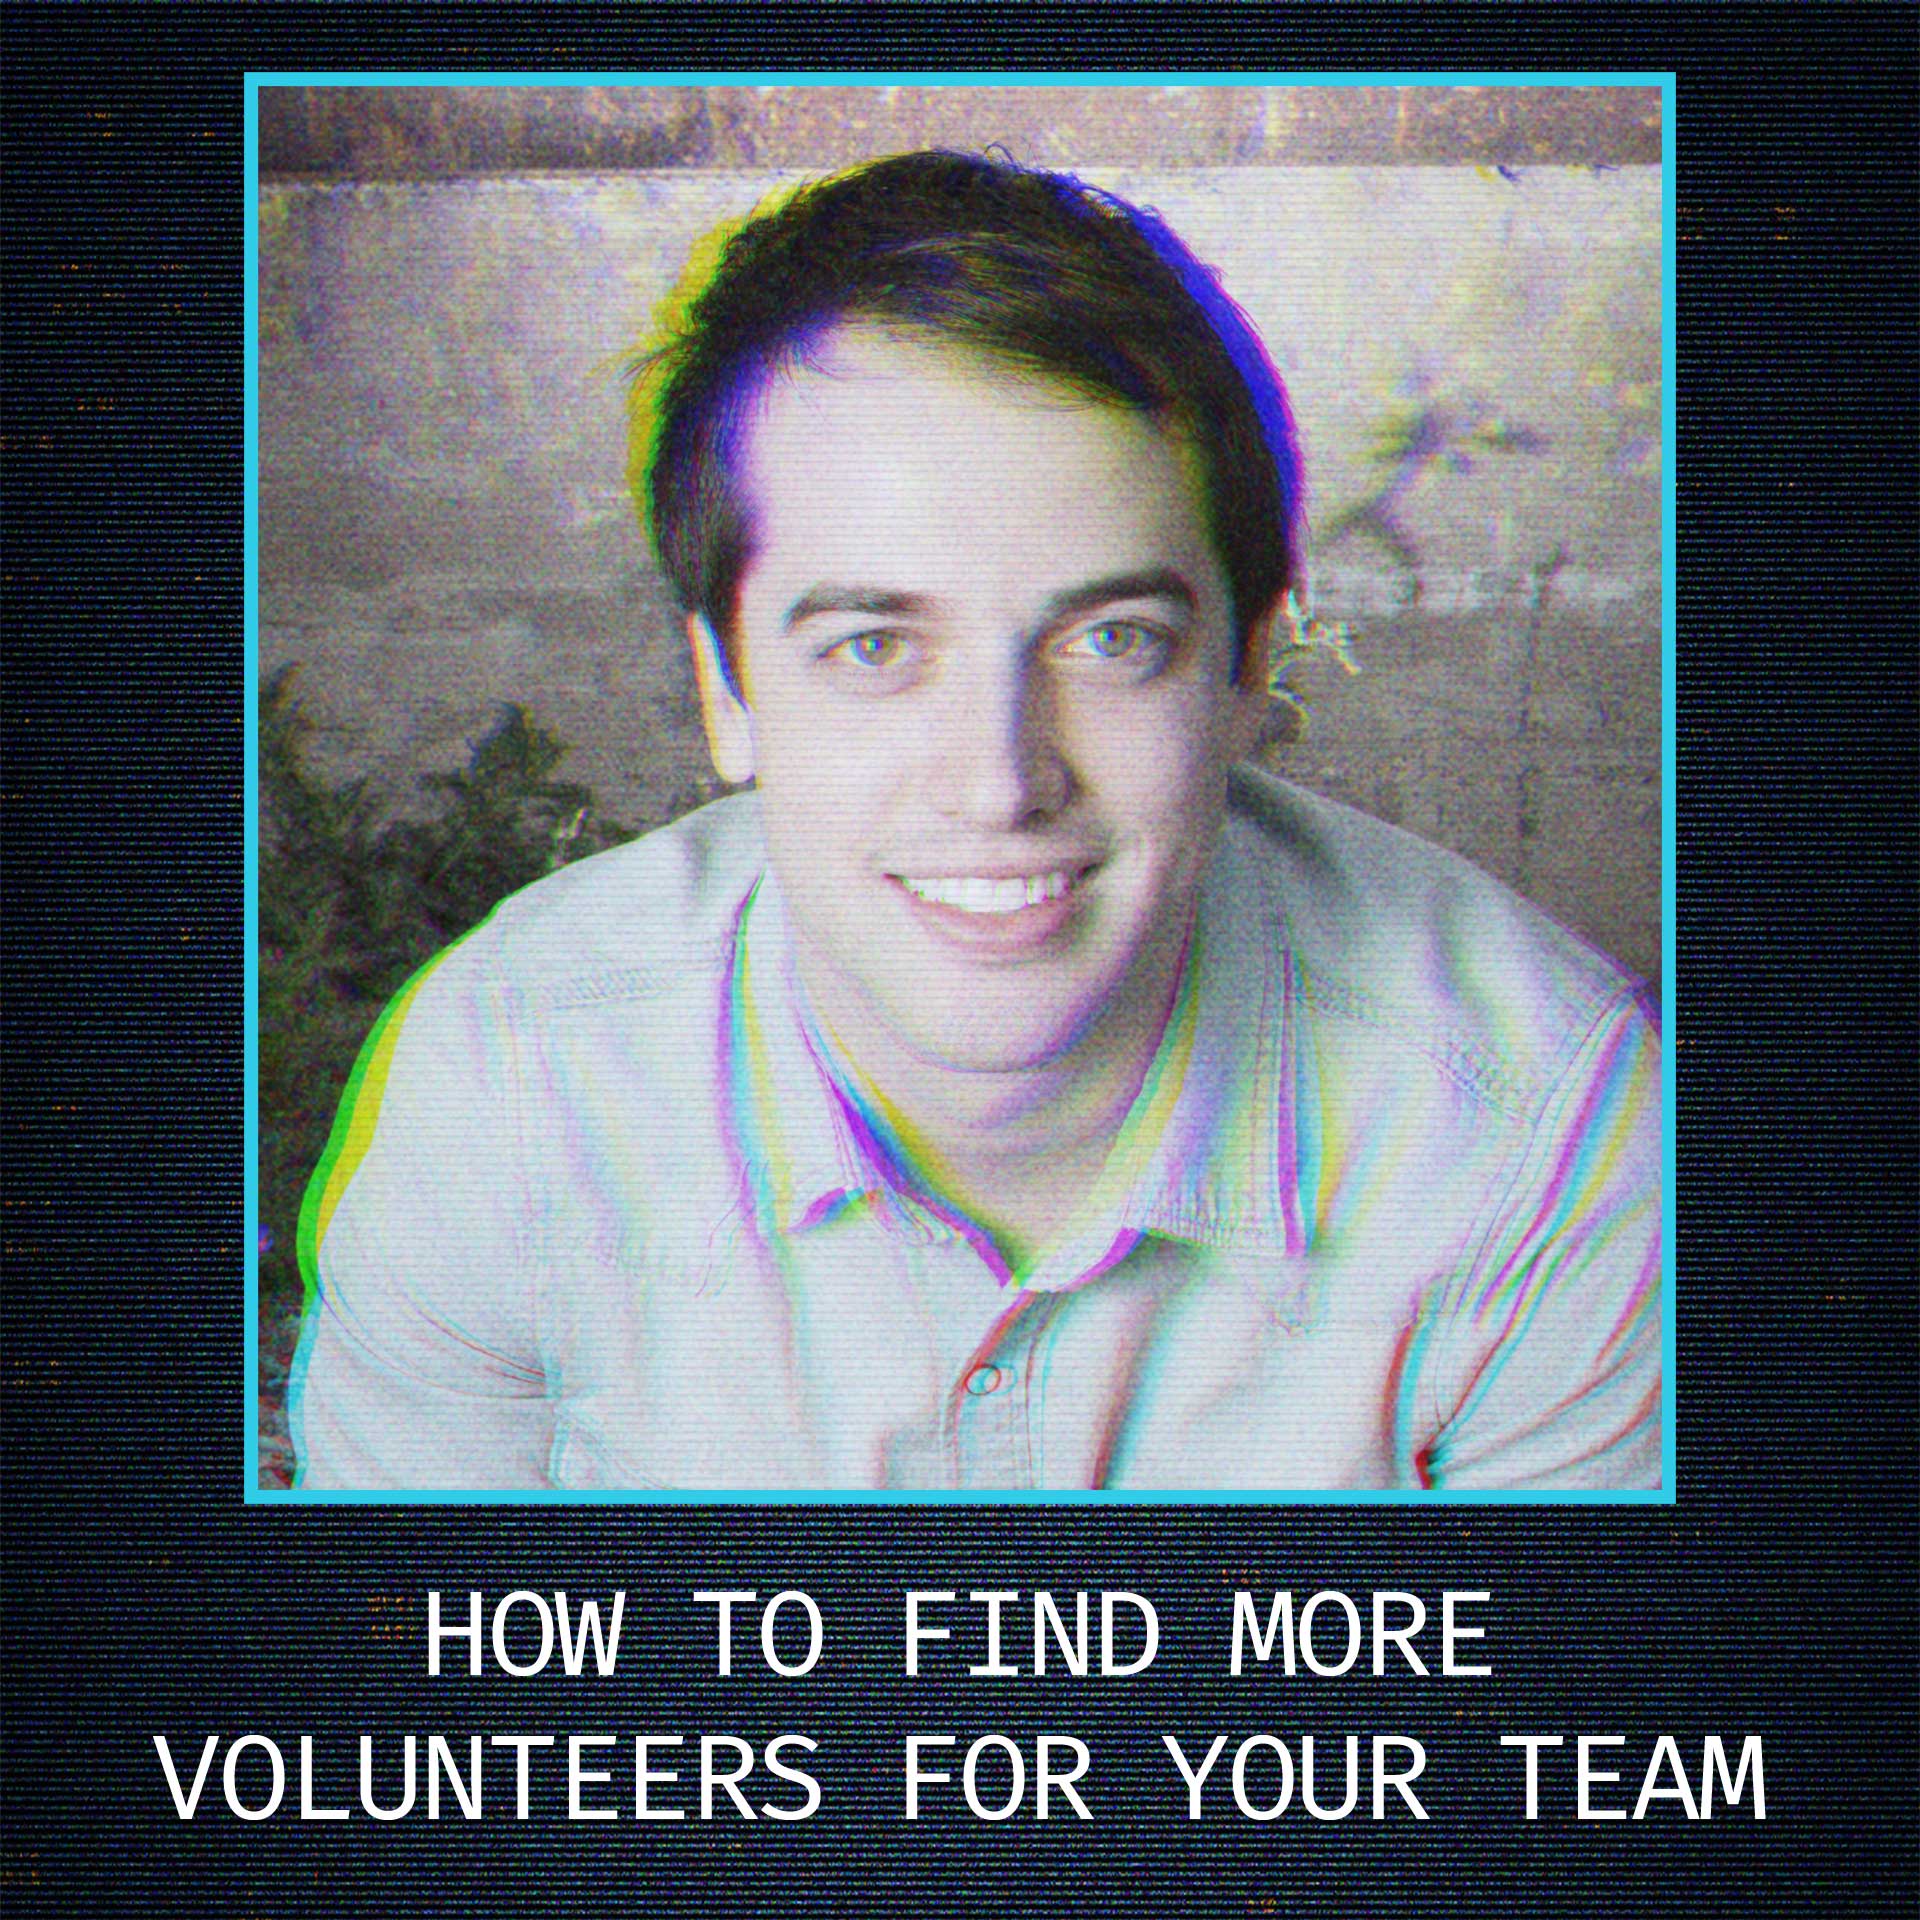 How to Find More Volunteers for Your Team